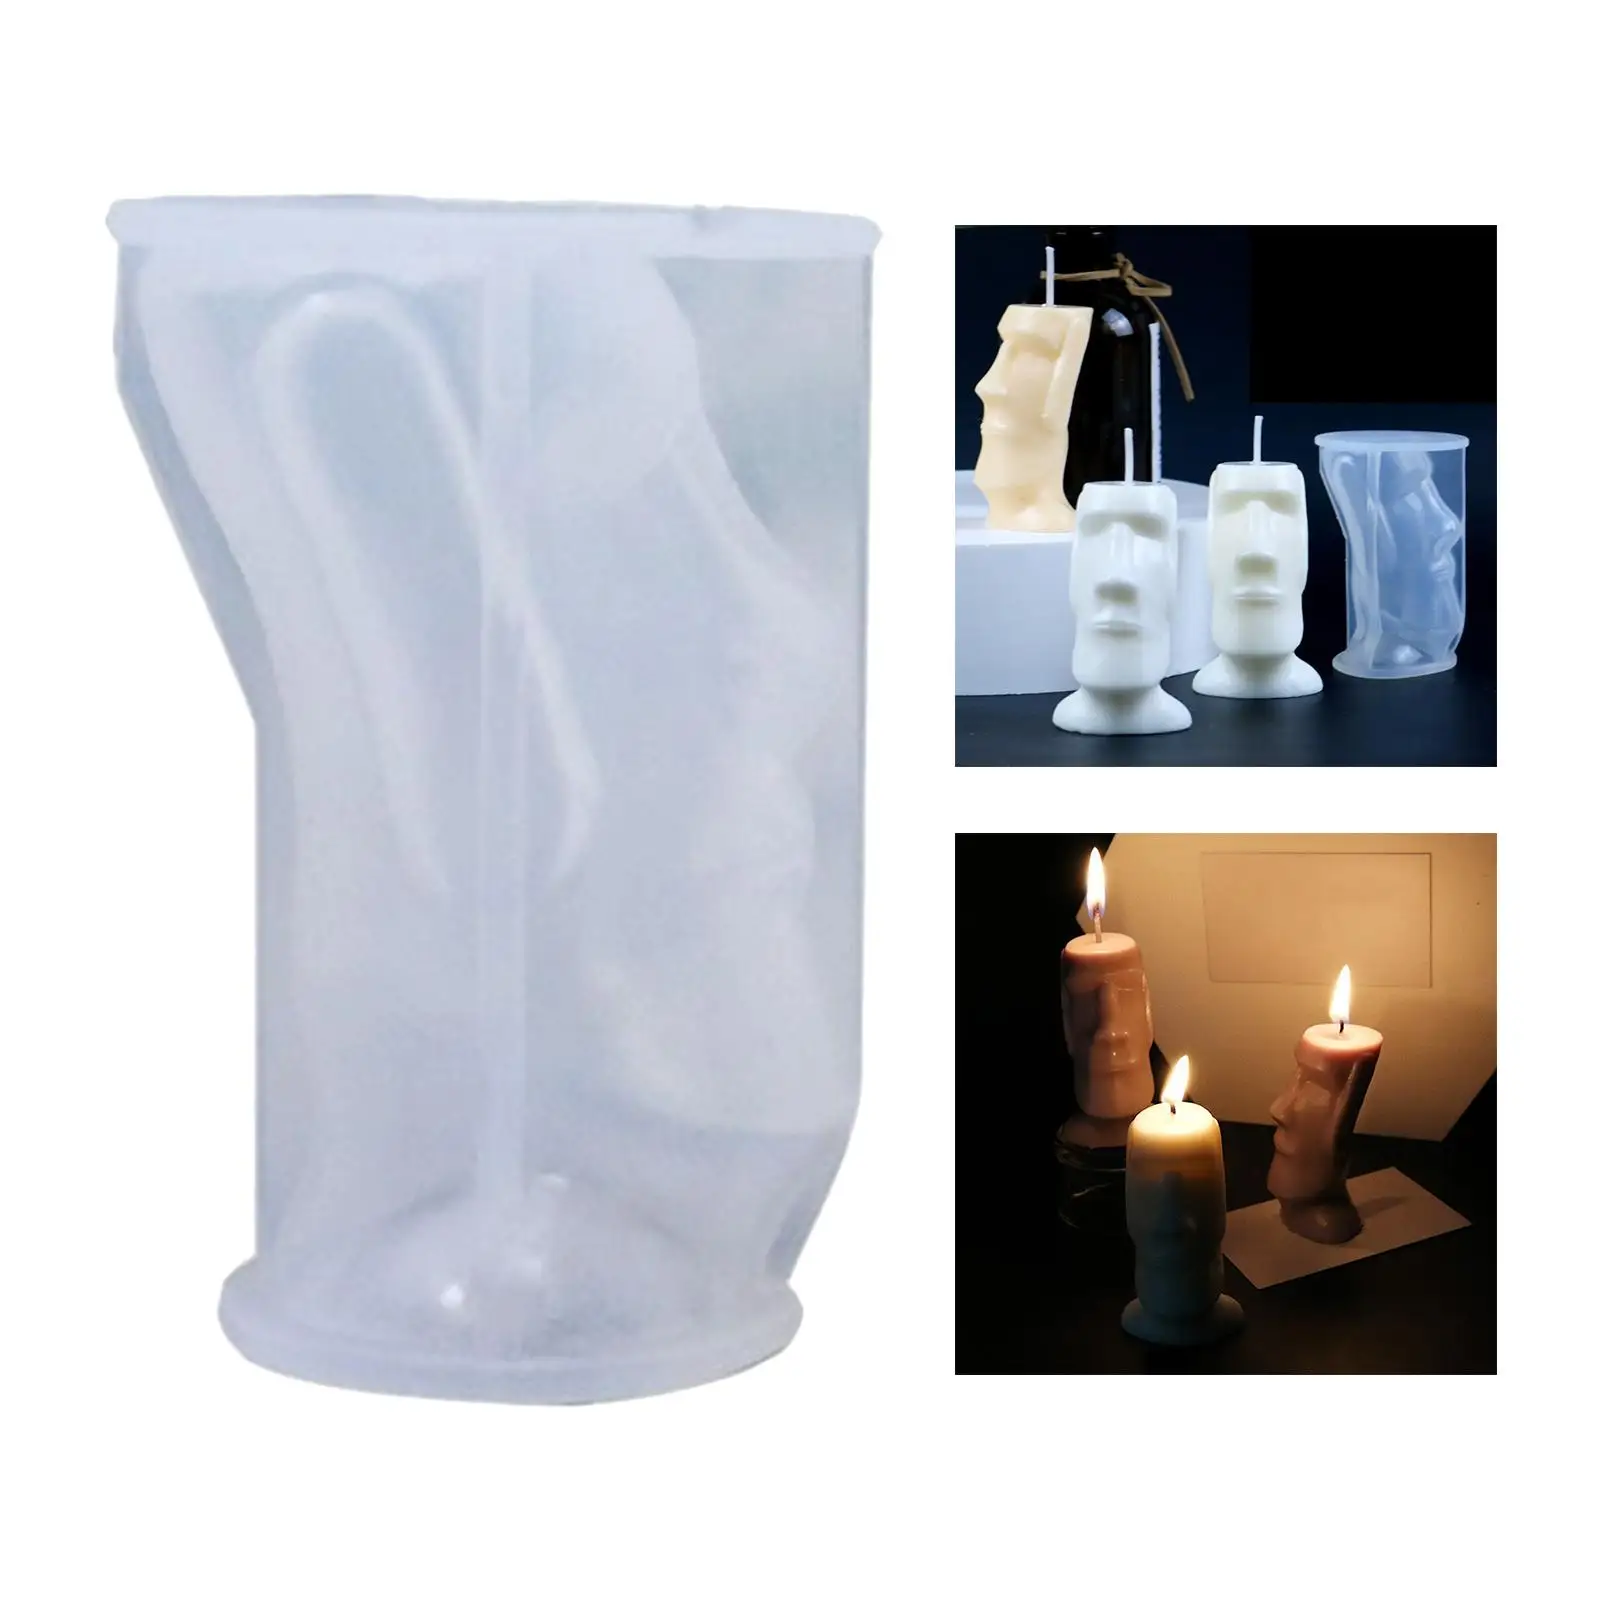 Candle Mold DIY Epoxy Resin Casting Moulds Silicone Moulds Resin Art for Dinner Home Decor